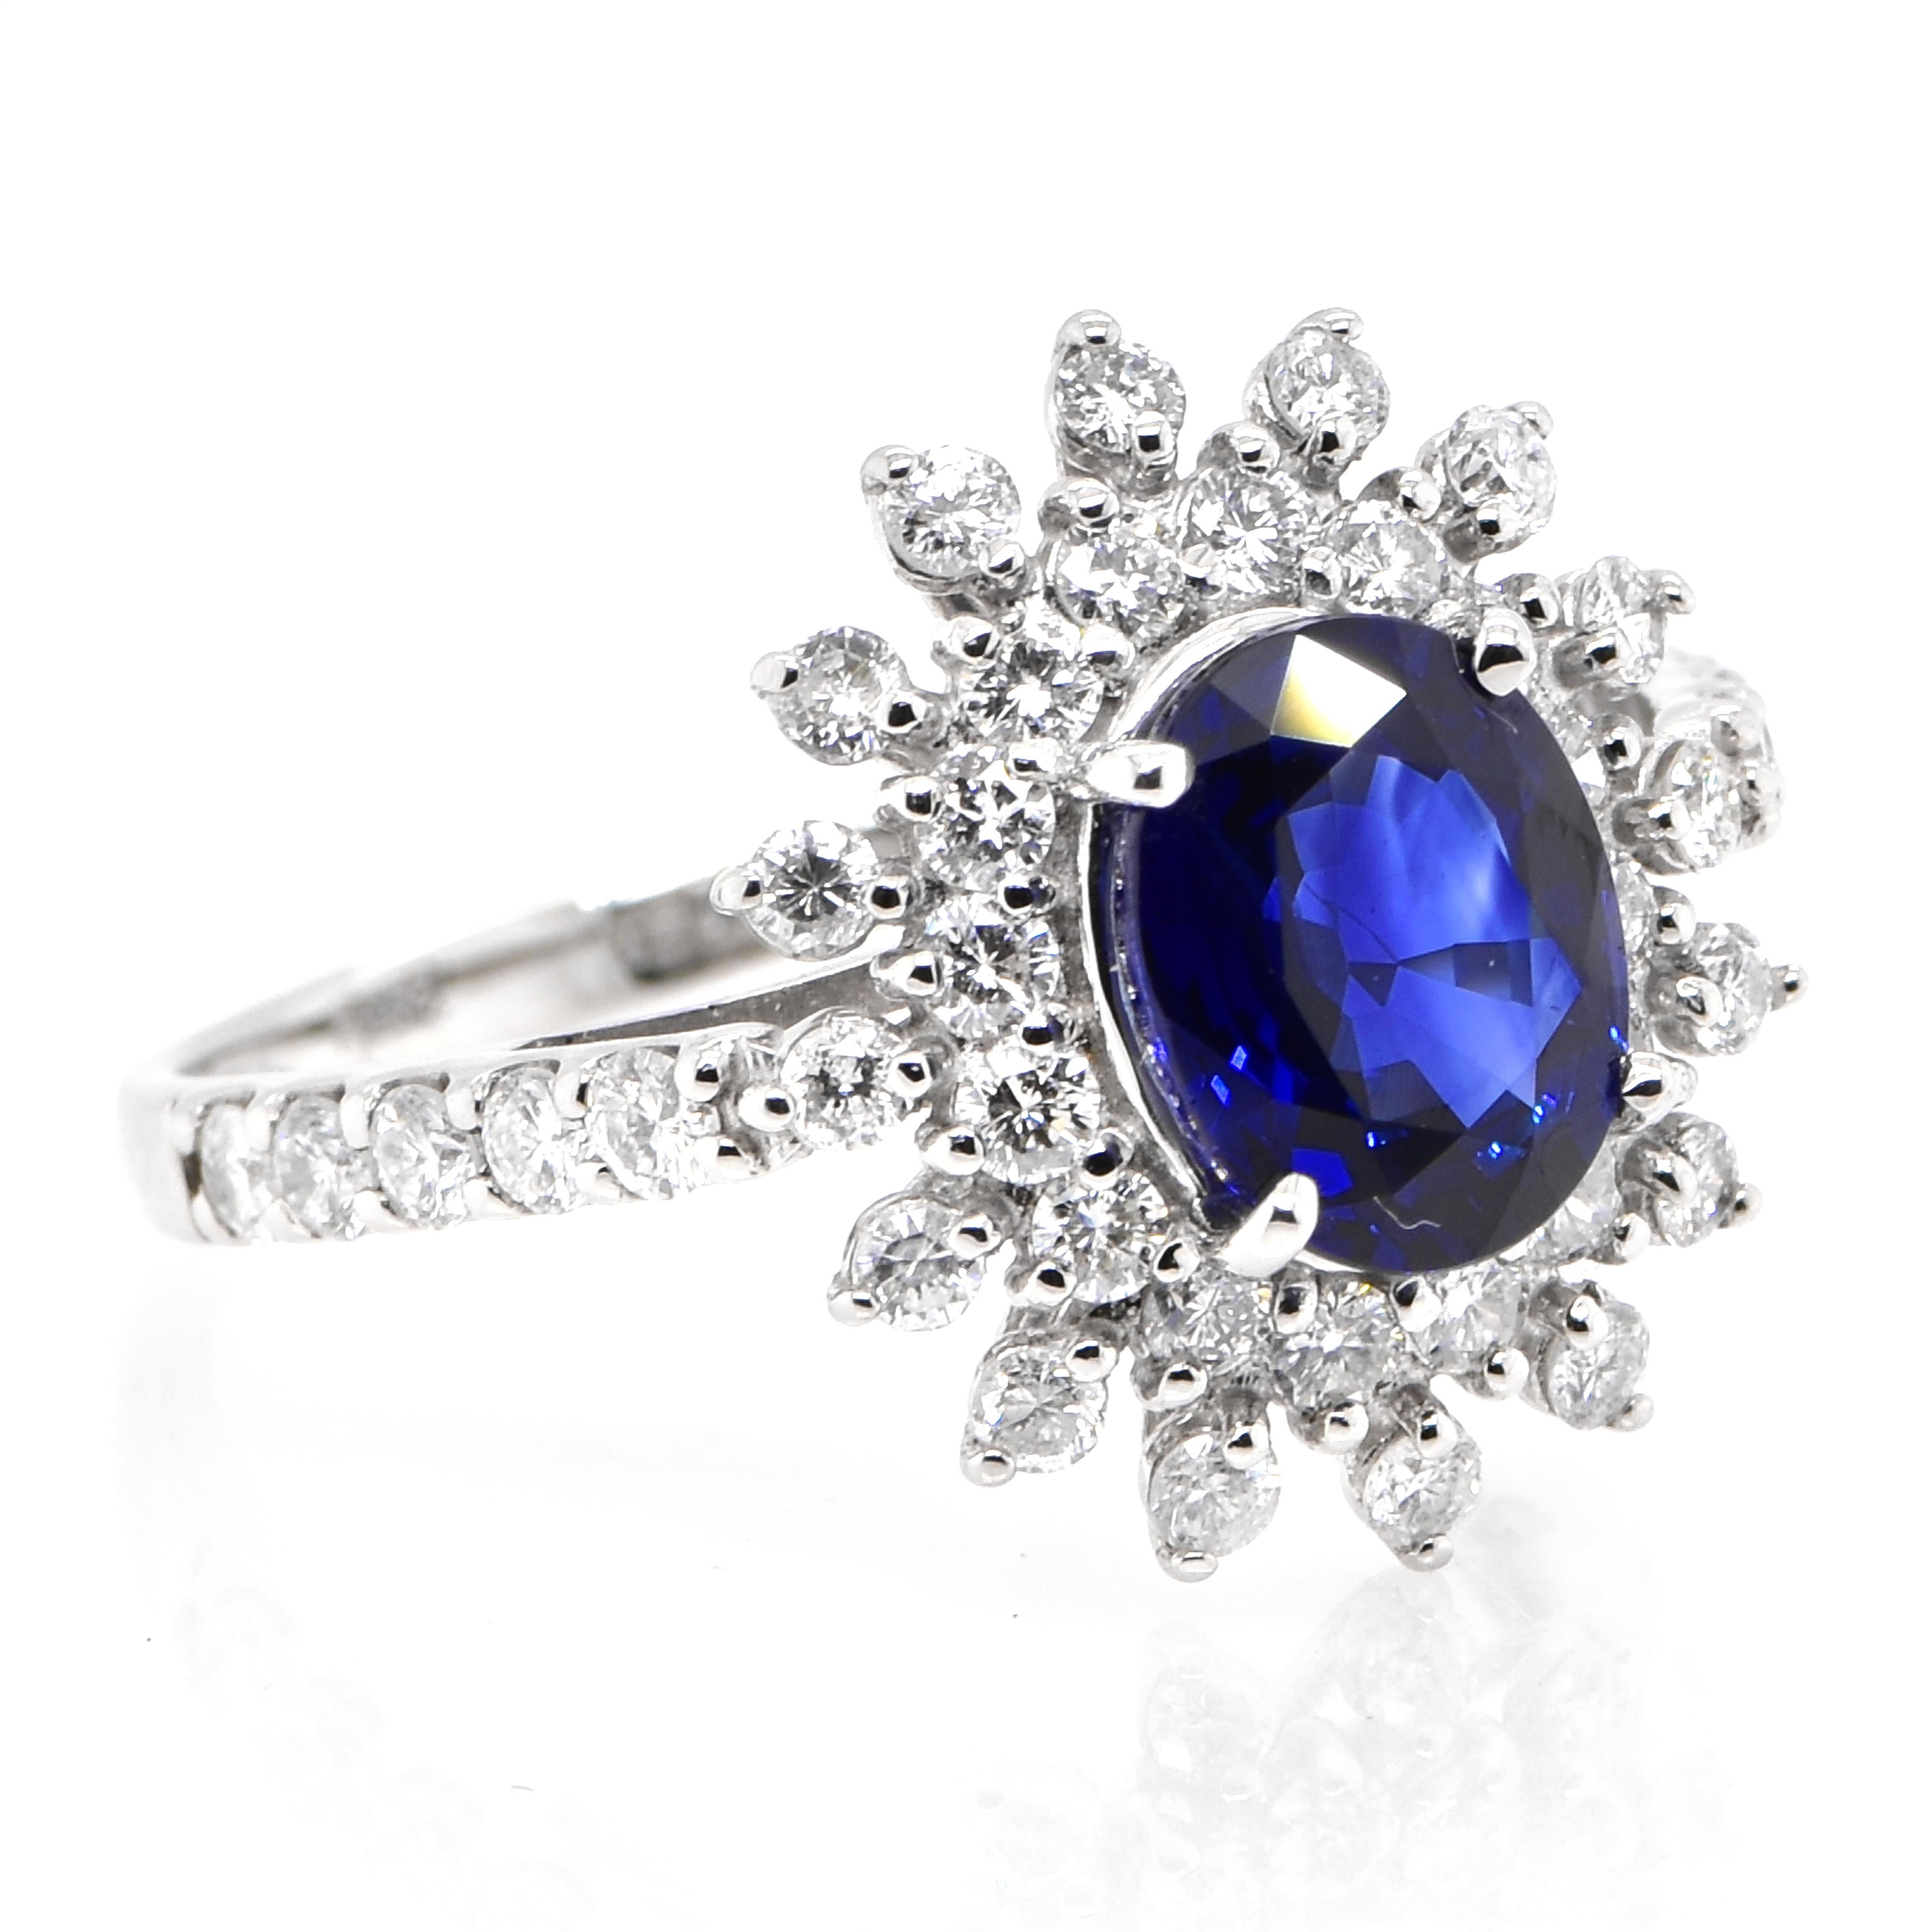 Modern 1.57 Carat Natural Sapphire and Diamond Double Halo Ring Made in Platinum For Sale